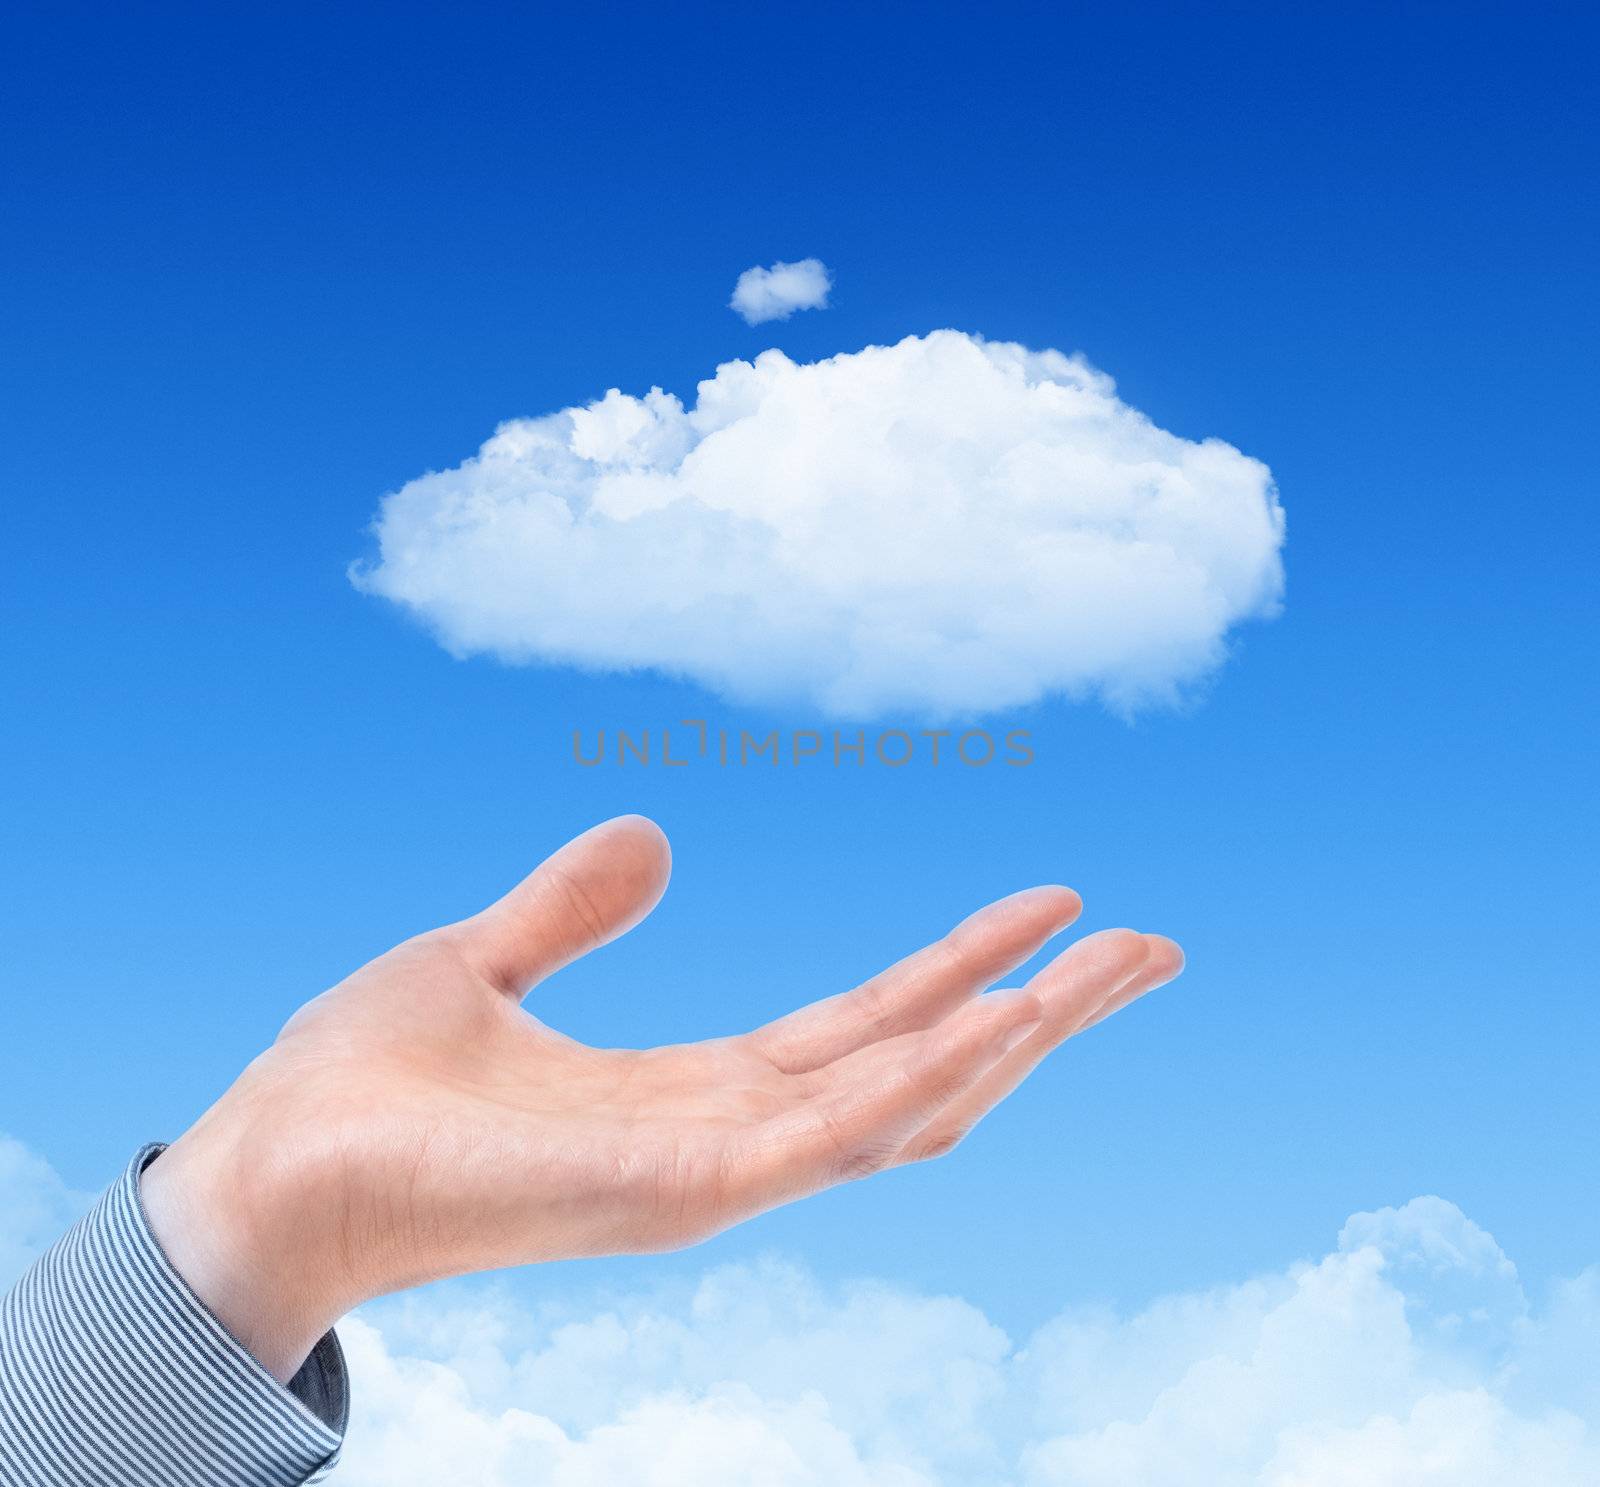 Man hand propose cloud against blue sky with clouds on background. Concept image on cloud computing and eco theme.